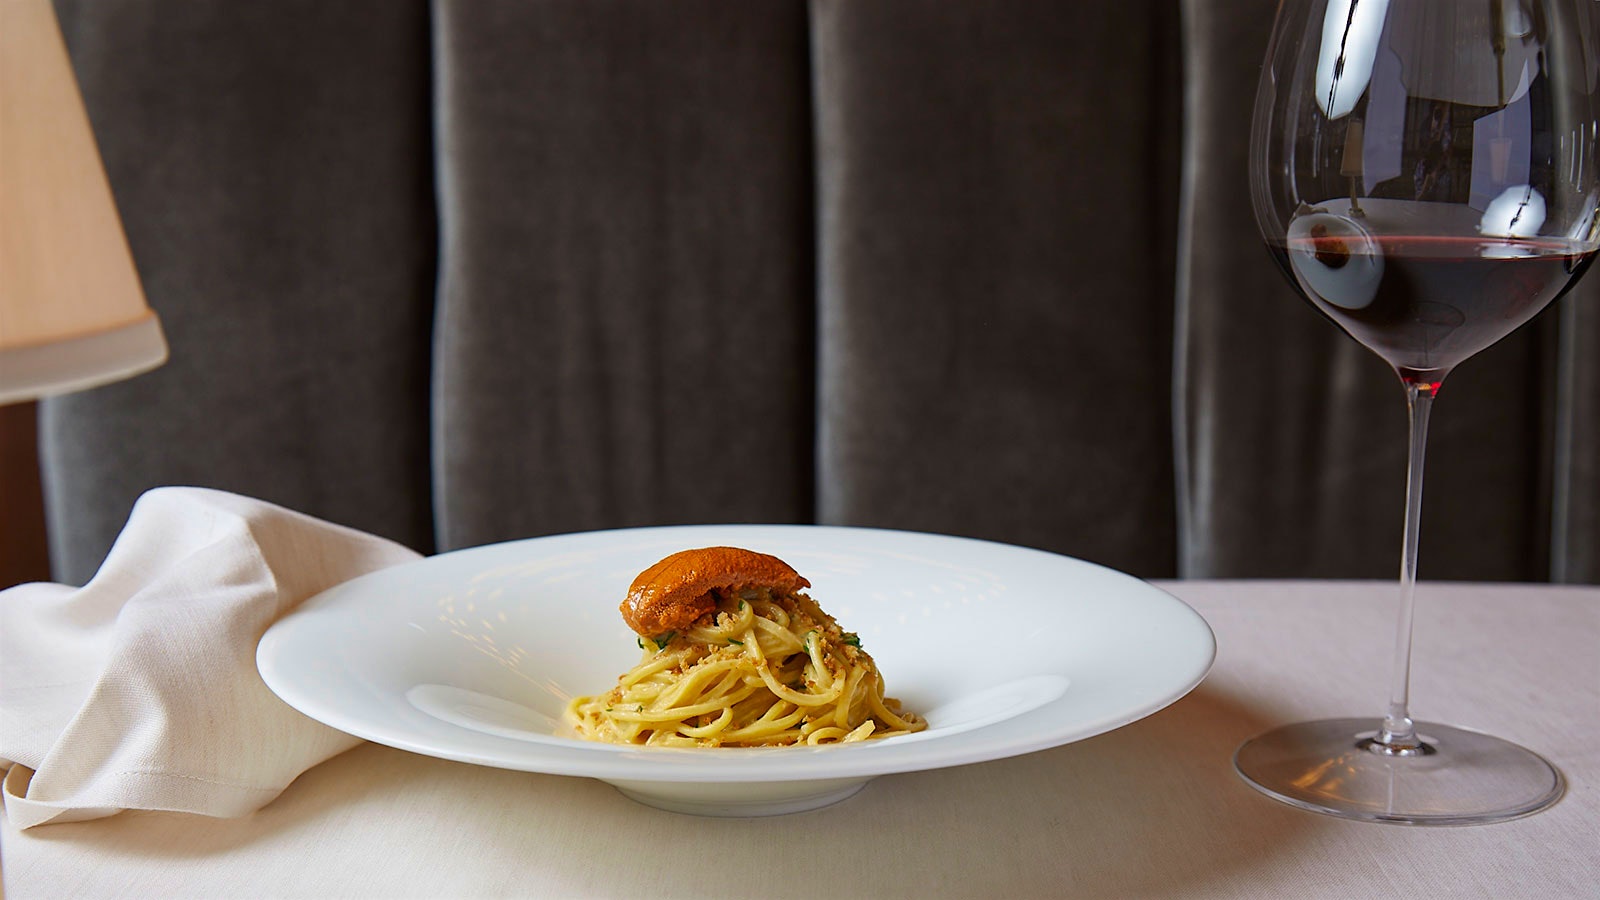  A plate of spaghetti with sea urchin, garlic, lemon and pepperoncini next to a glass of red wine at Four Twenty Five in New York City